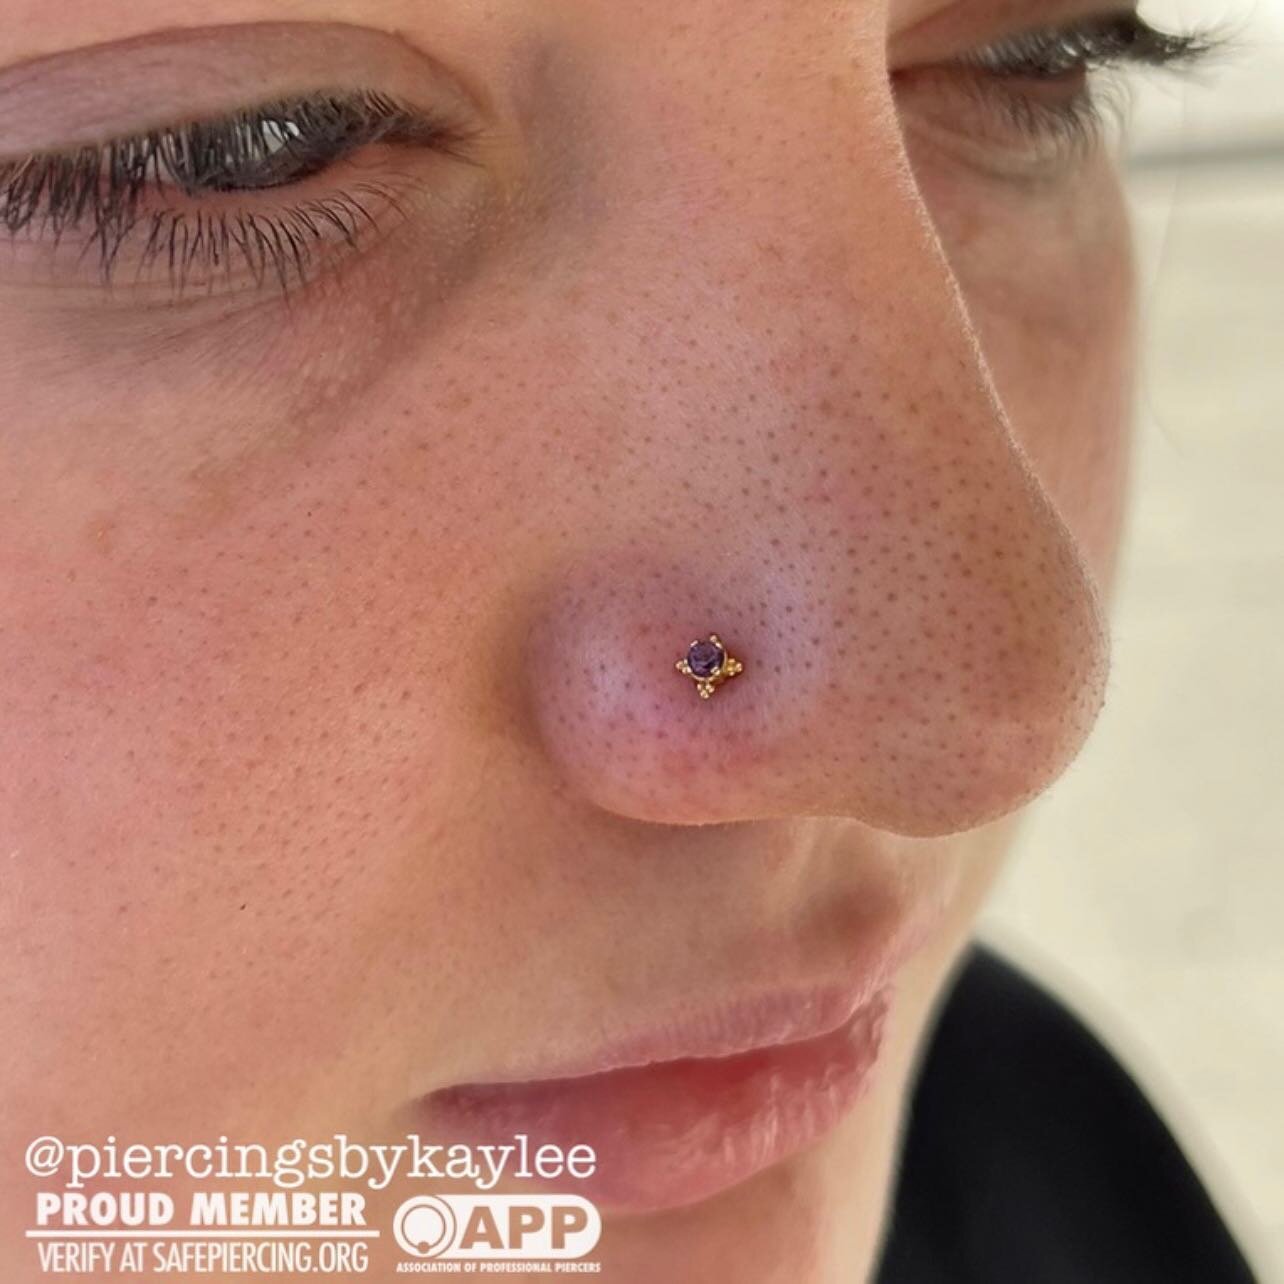 Nostril piercing featuring a gorgeous Zia end with genuine amethyst in 18k yellow gold✨
.
.
.
.
#nostrilpiercing #nosepiercing #gem #gemstones #amethyst #safepiercing #appmember #piercerbabes #gold #finejewelry #goldjewelry #kcmo #kc #kansascity #202